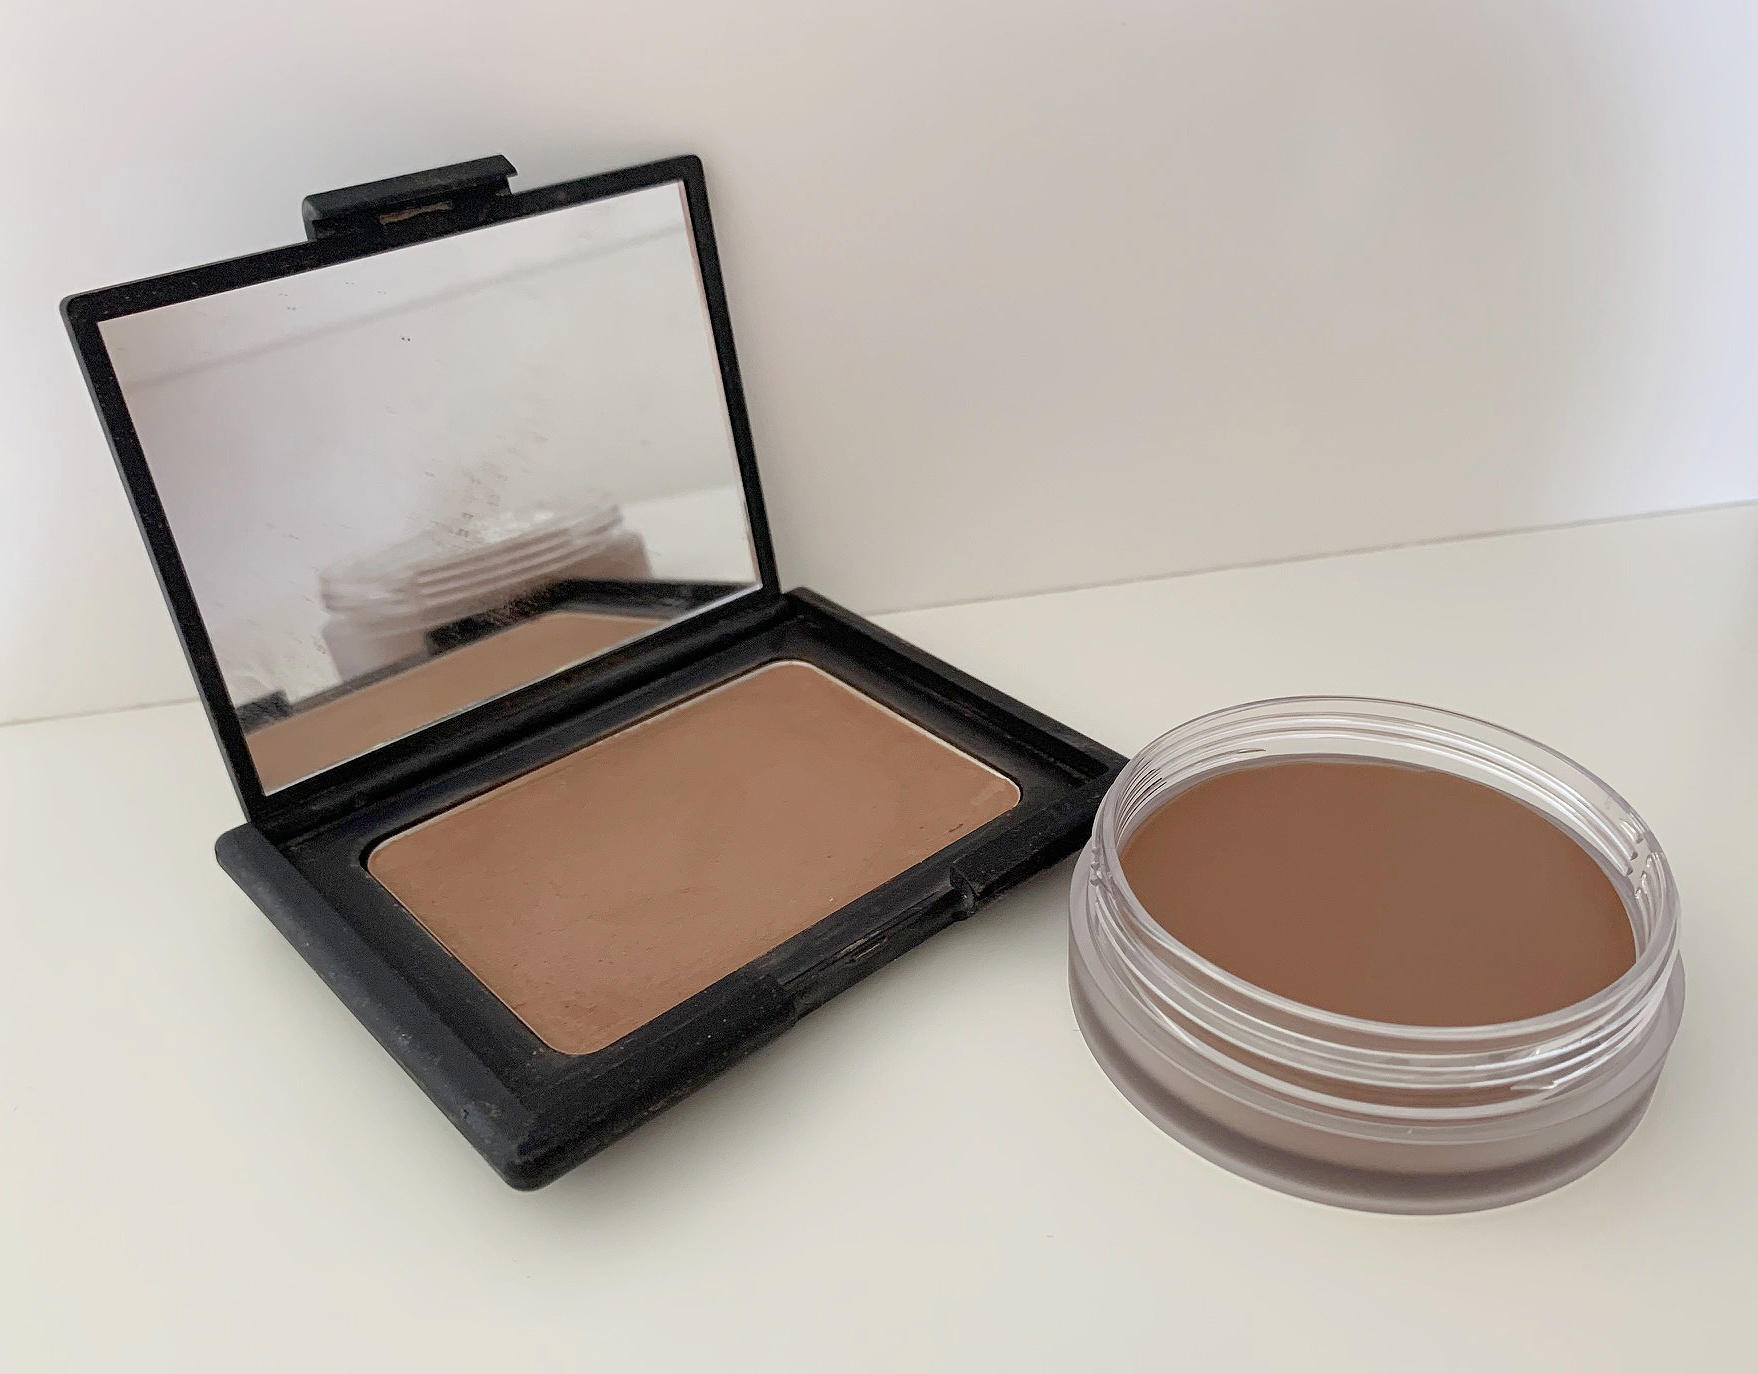 Bloodstained Indvandring champion Nars Sunkissed Bronzing Cream Review | Beautylymin